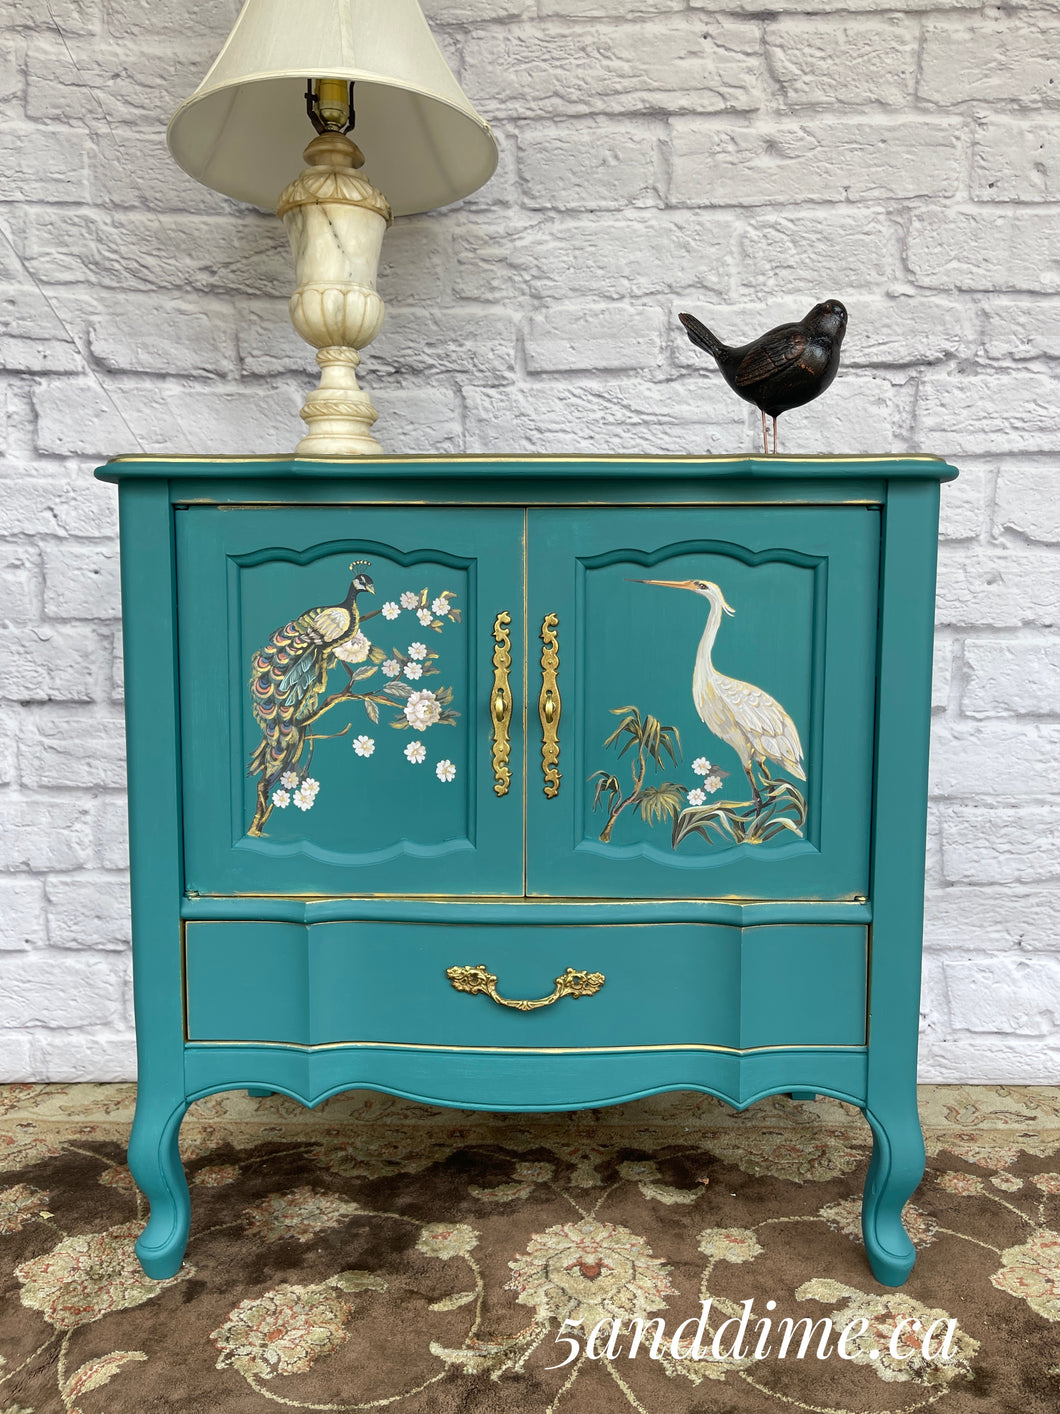 Upcycled Deco Birds Cabinet